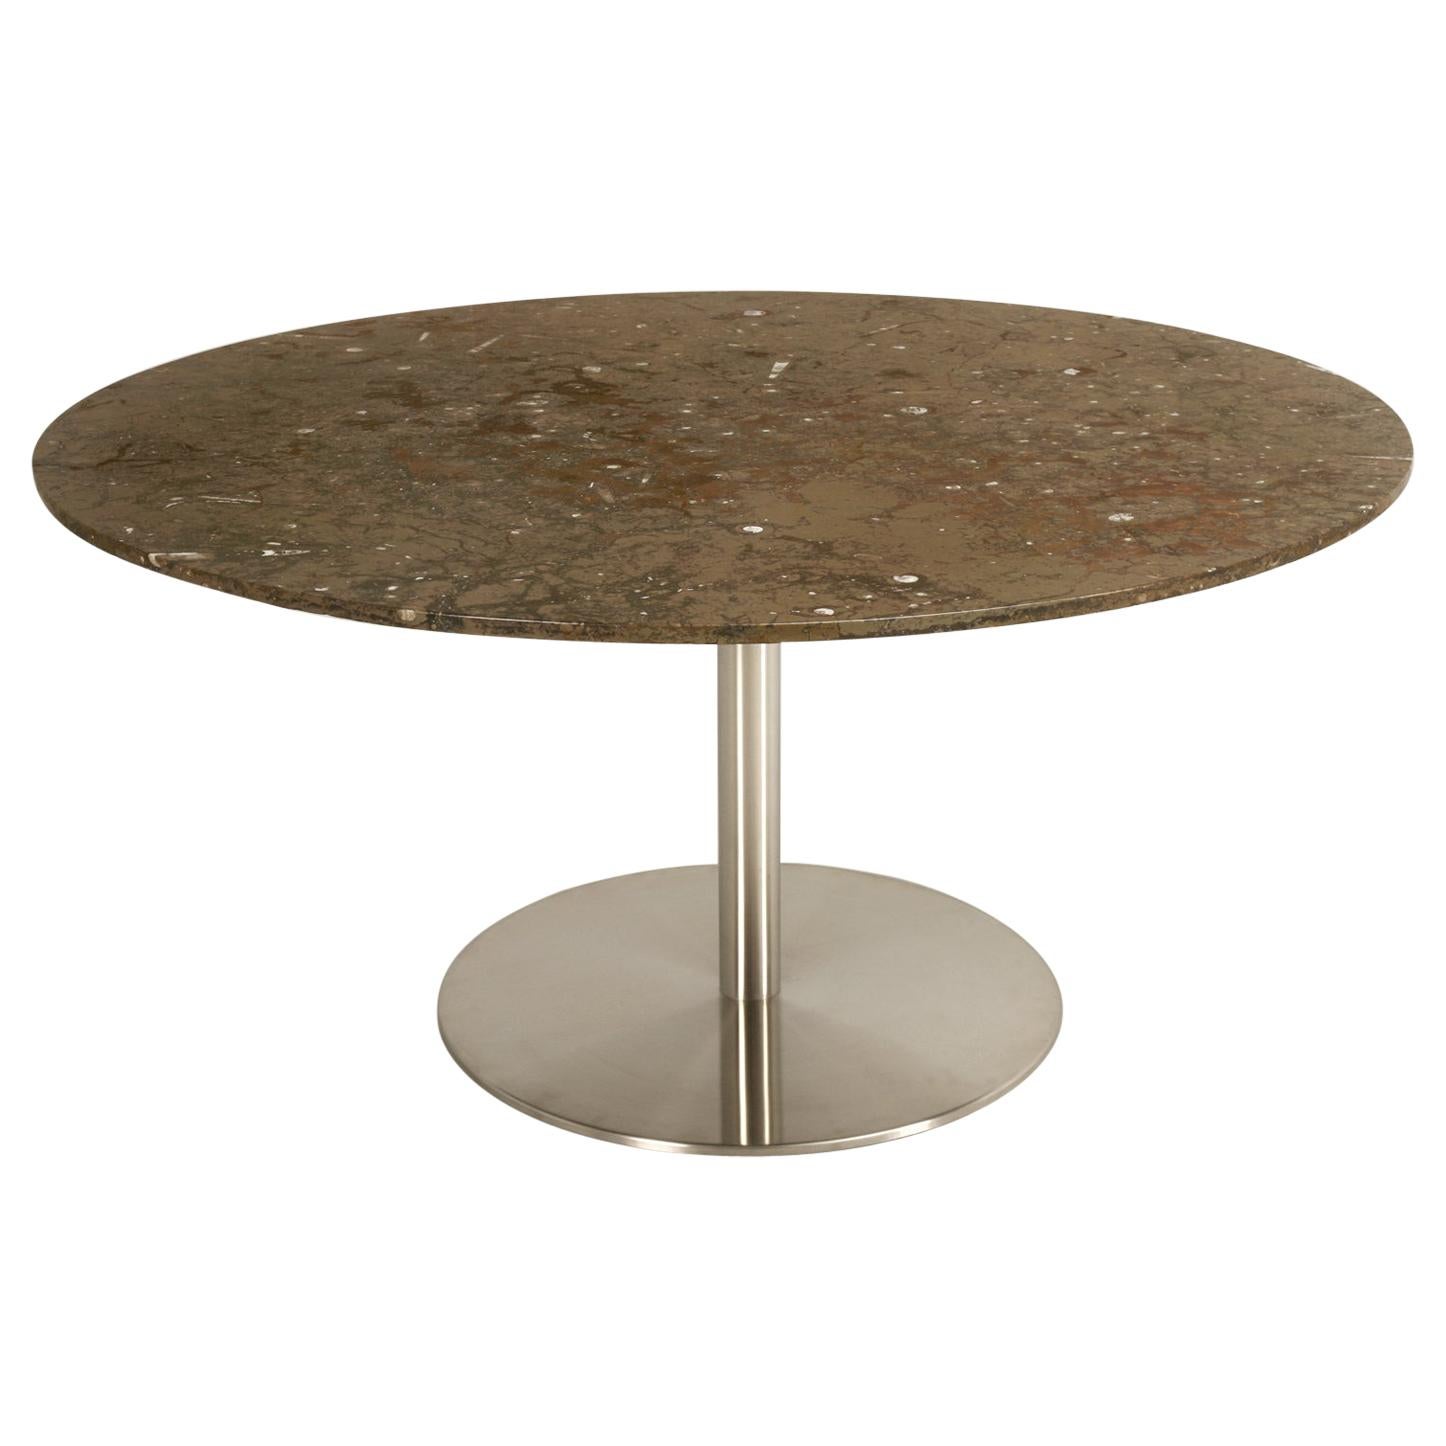 Moroccan Fossil Stone Top and Stainless Steel Base Dining or Kitchen Table